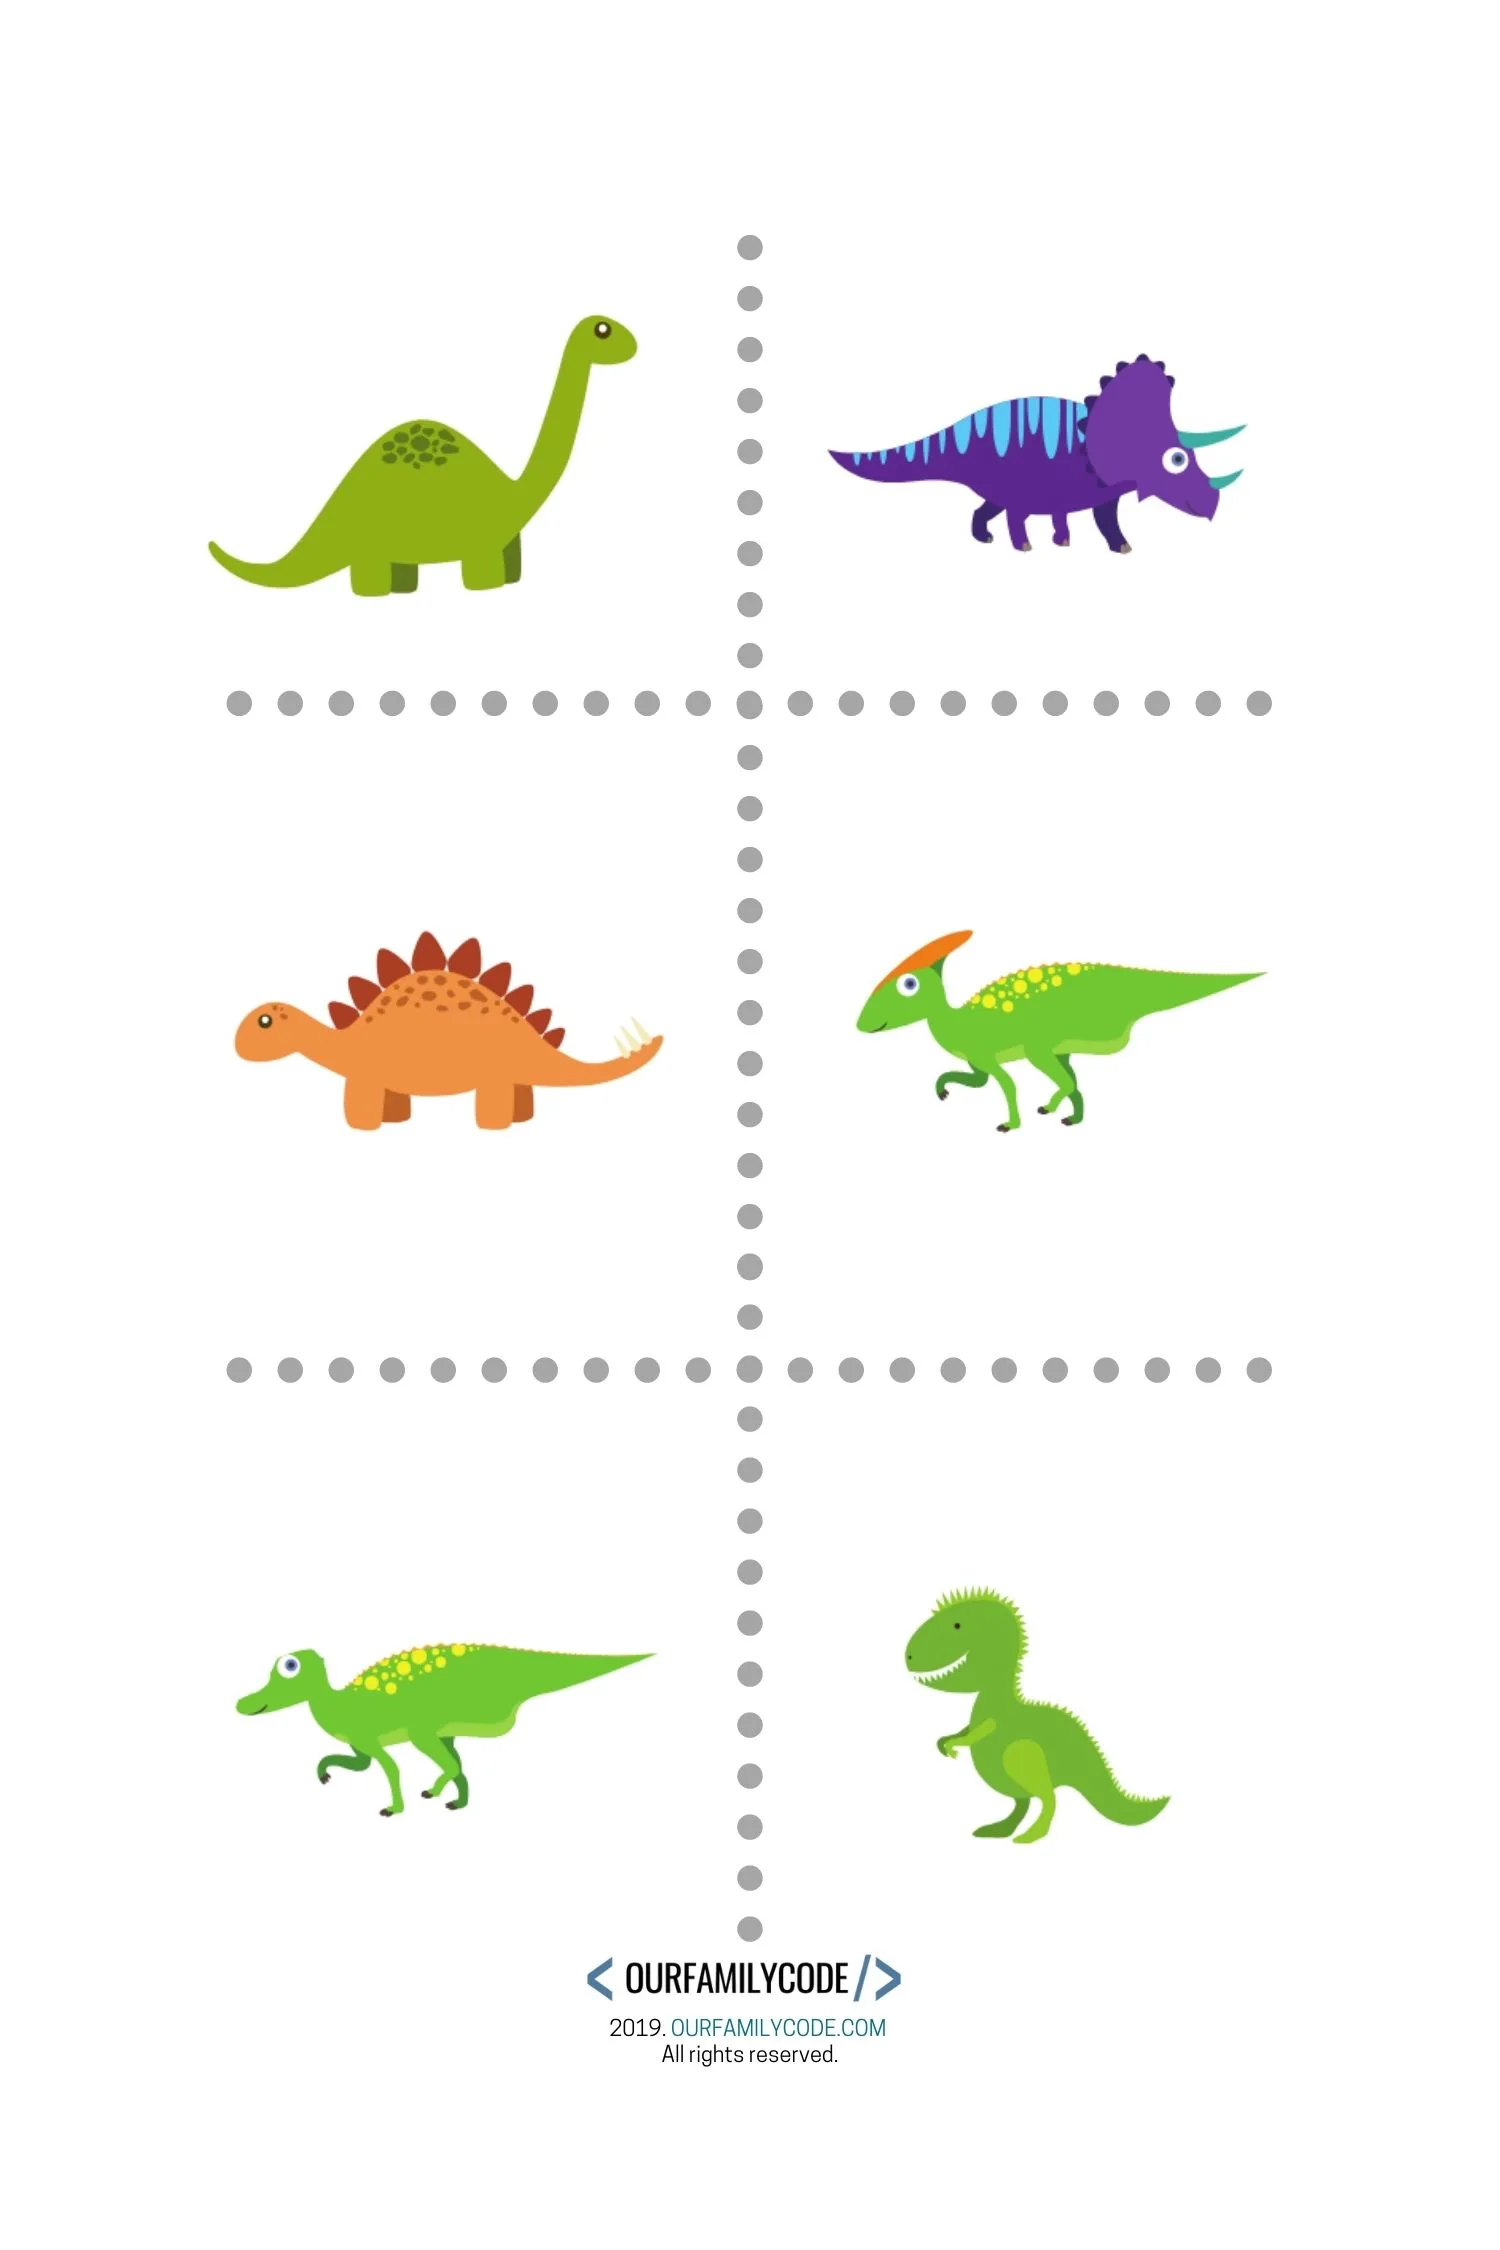 Learn Dinosaur Names with Greek and Latin Words - Our Family Code